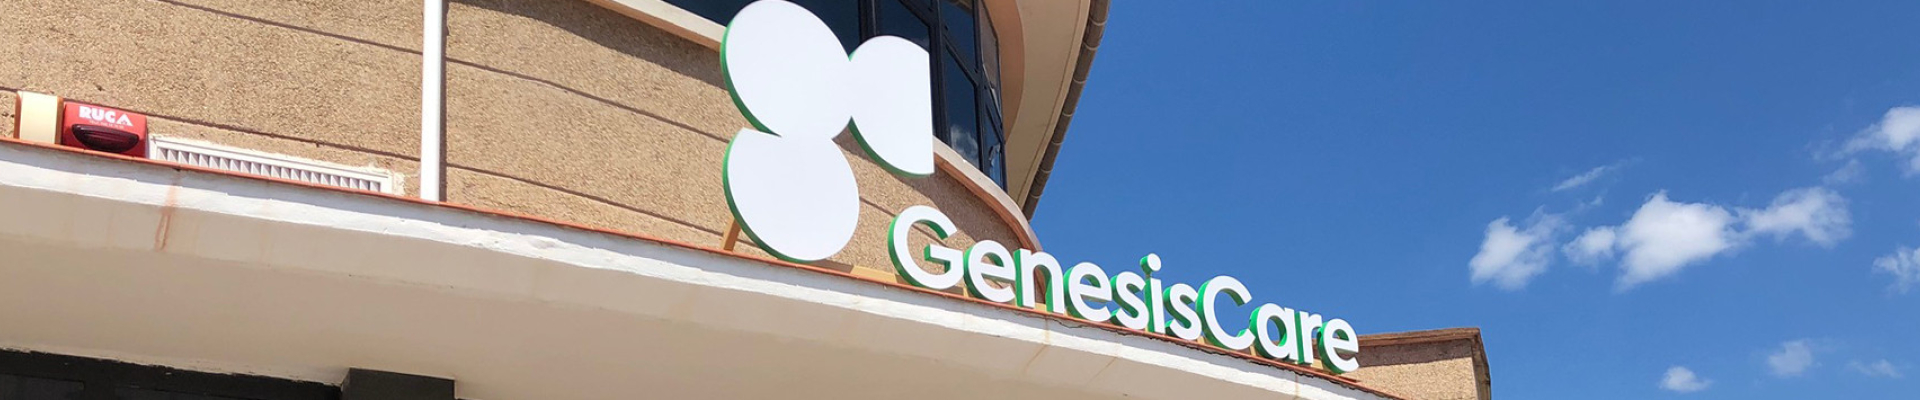 Pearce Signs delivered a consistently high quality brand implementation programme for Genesis Care